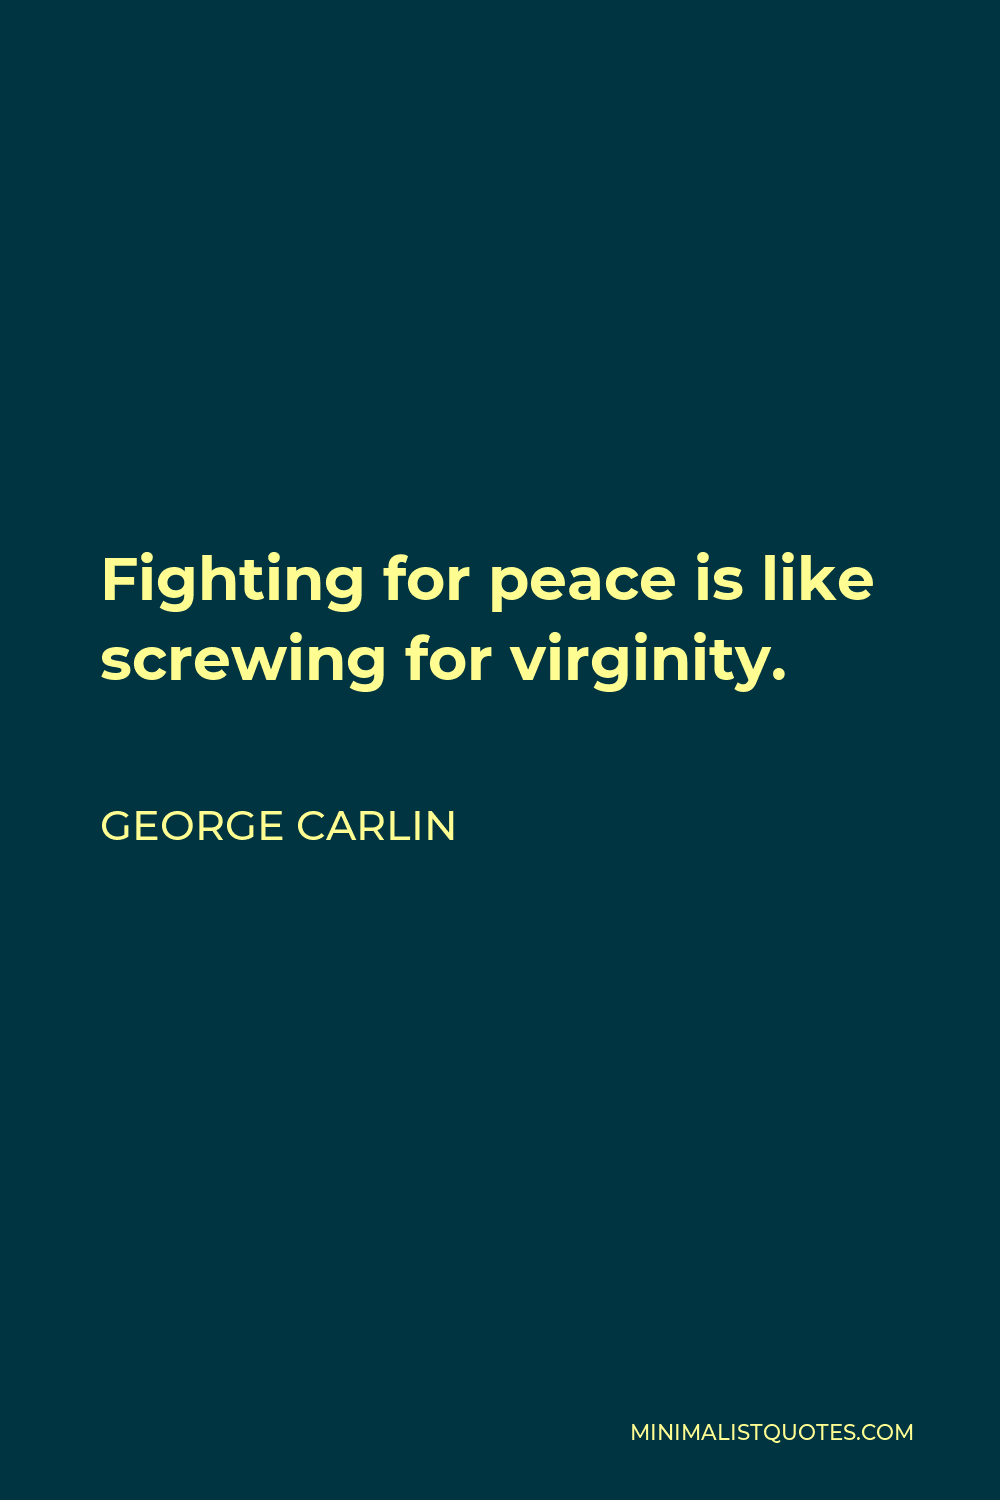 George Carlin Quote - Fighting for peace is like screwing for virginity.